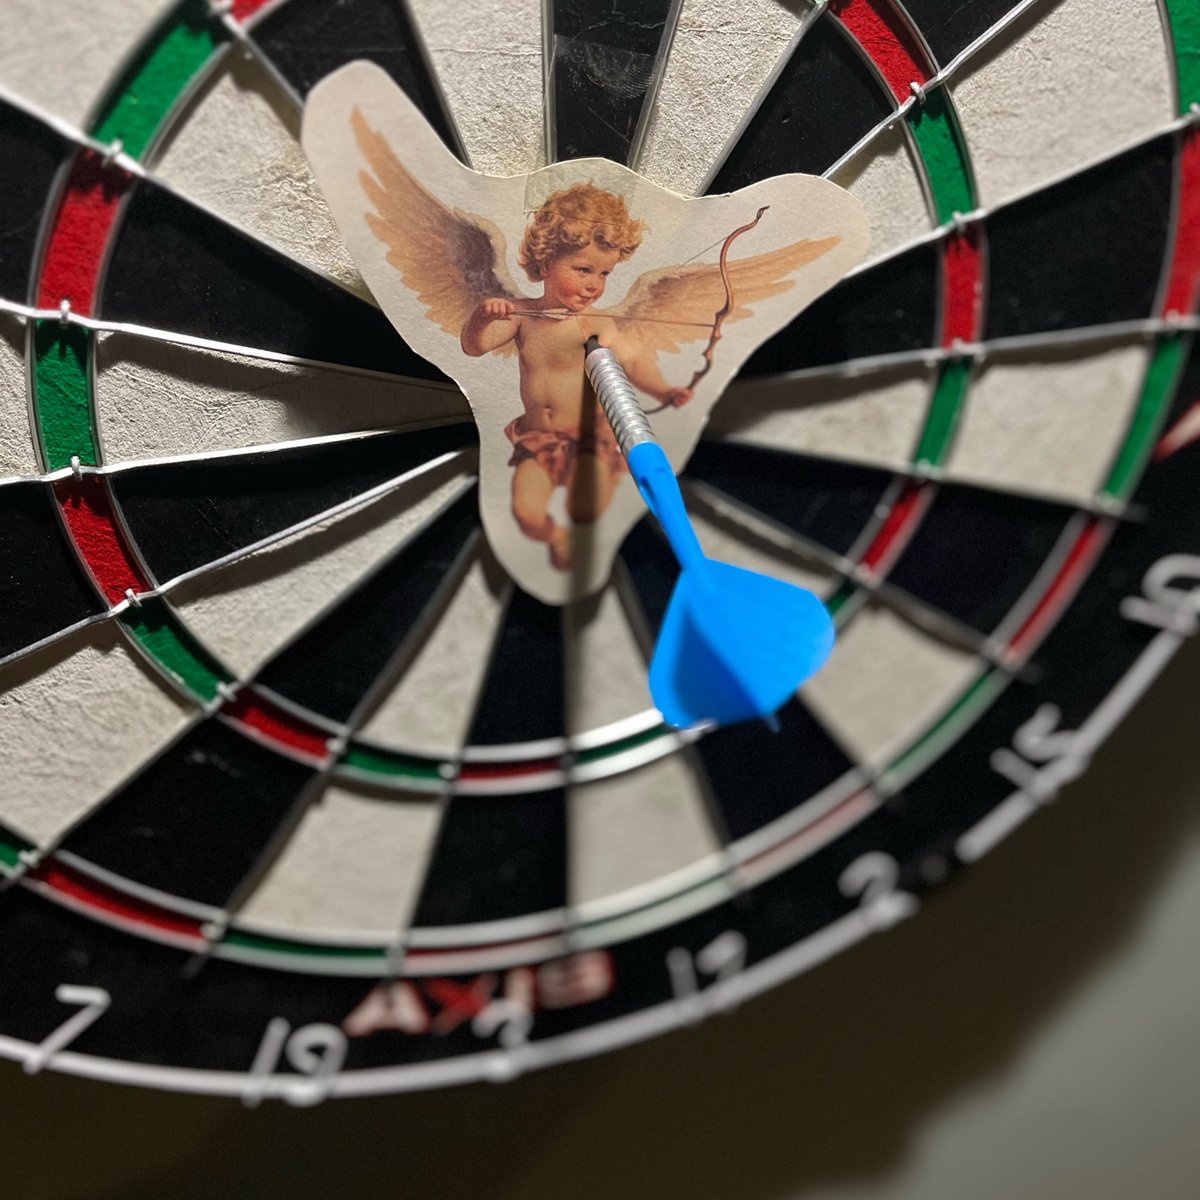 Anti Valentines 🎉 

Live Music with #Luchstefano tonight 

And let us help u get over your ex

Still thinking about punching them?
Why not throw darts at them instead?

Swap Cupid for picture of your Ex

#party #livemusic #antivalentines #cupid #w5 #bestie #prosecco #fun #darts